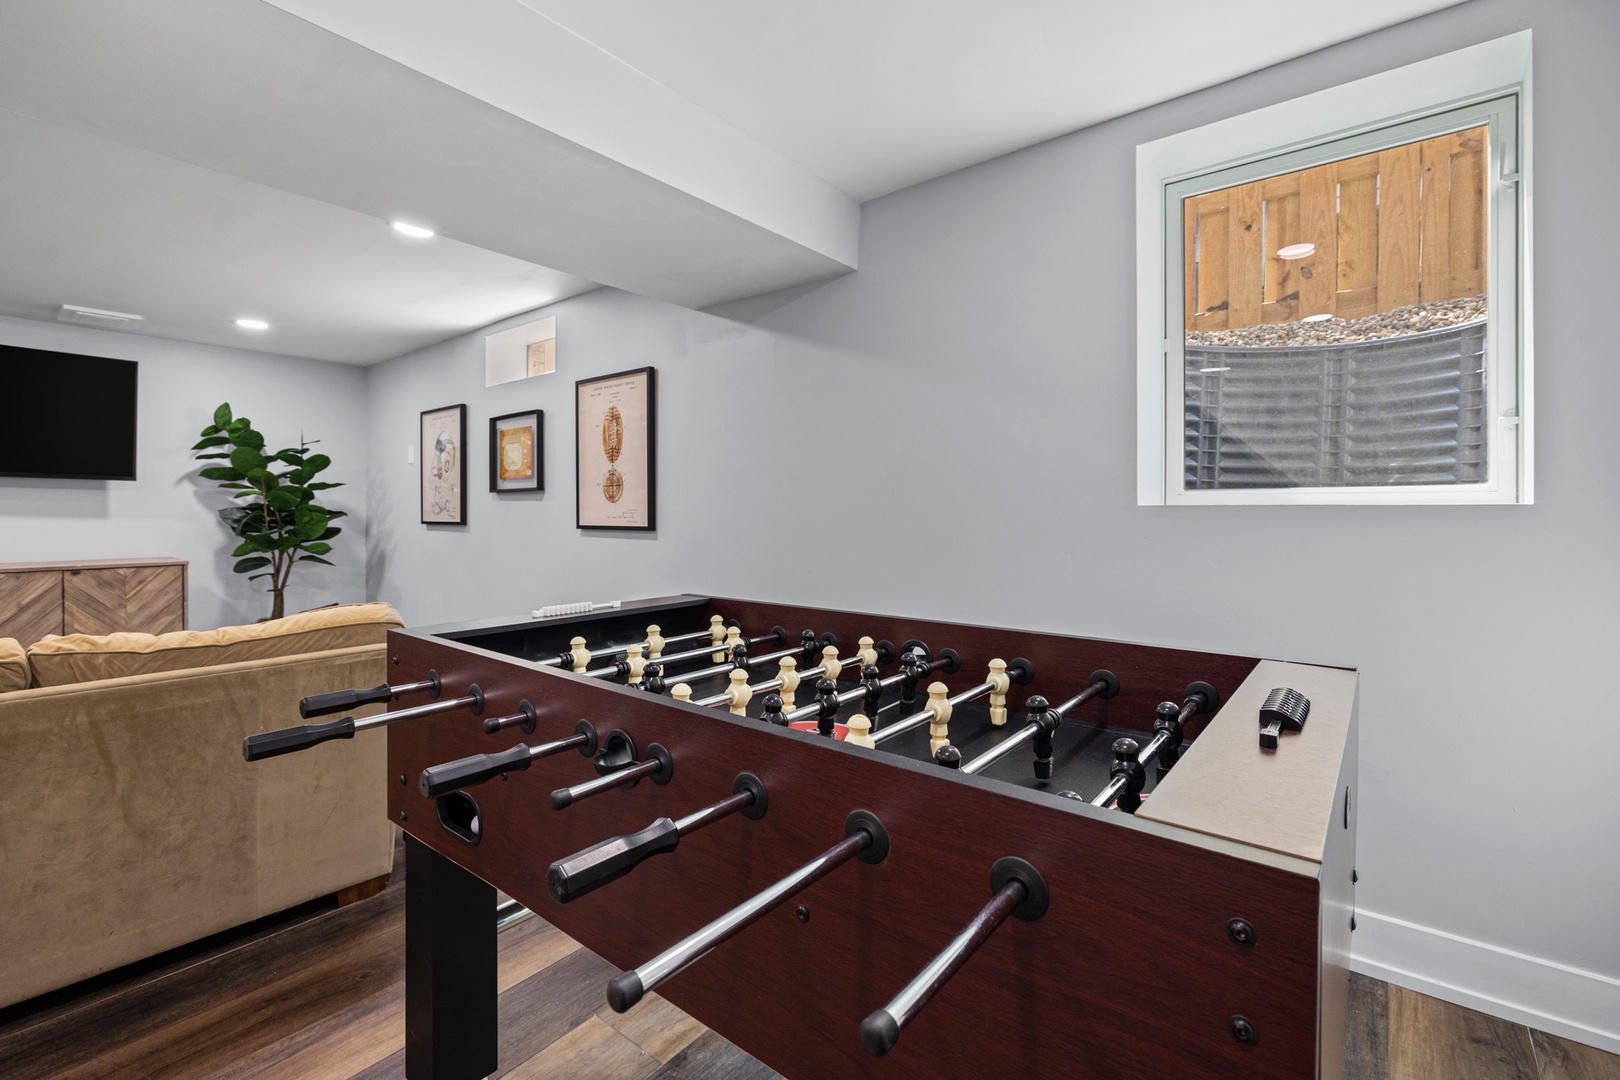 Chill out in the basement with a game of Foosball.